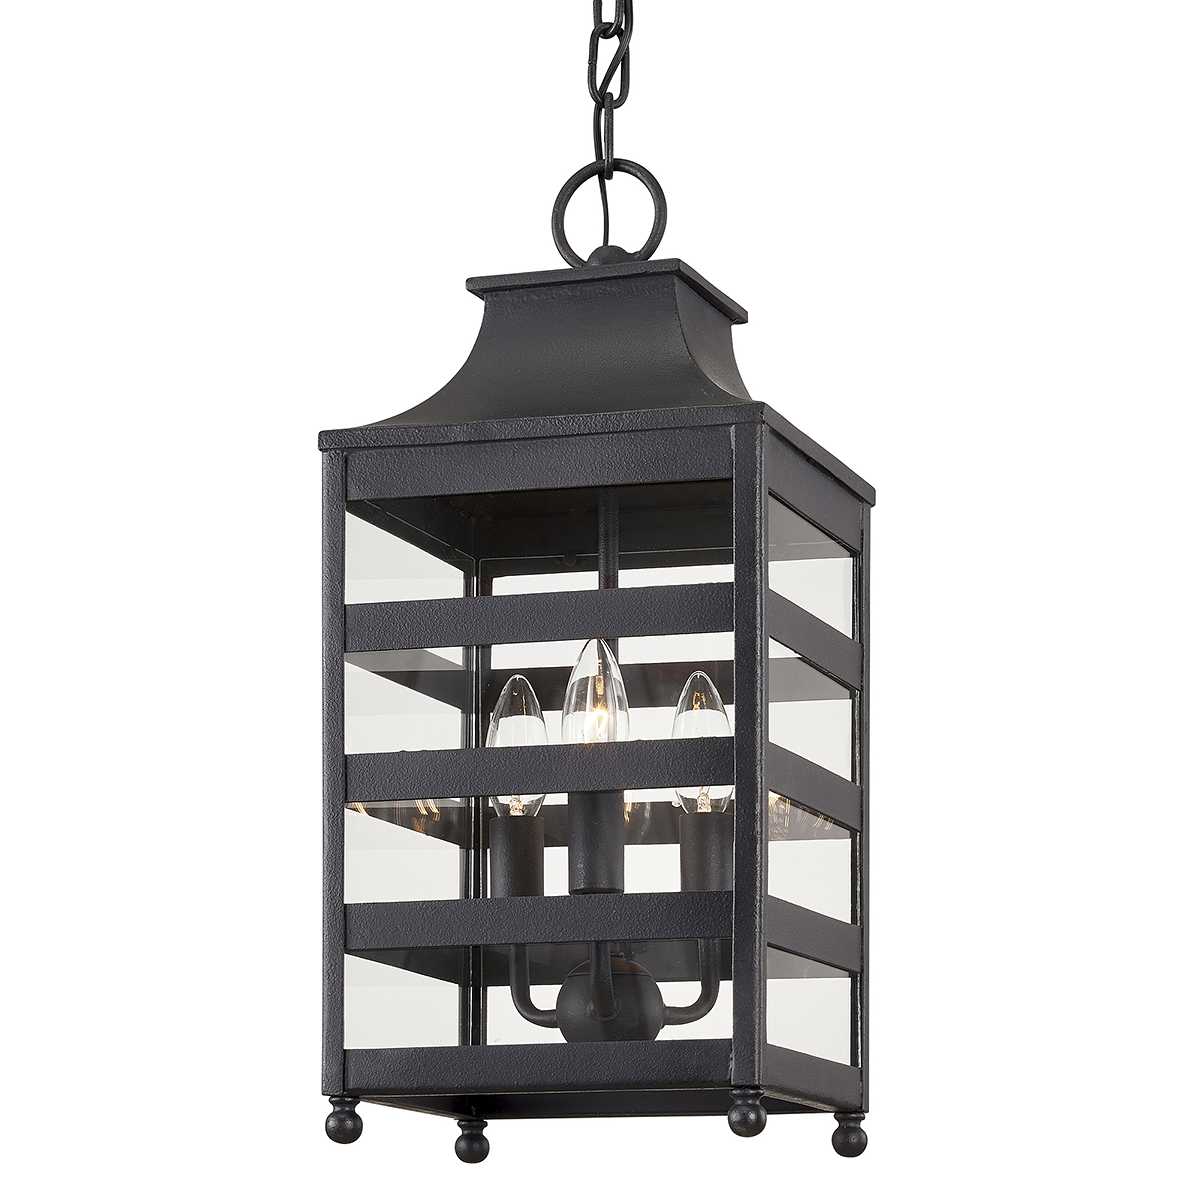 Troy Lighting HOLSTROM 3LT HANGER F7437 Outdoor l Wall Troy Lighting FORGED IRON  